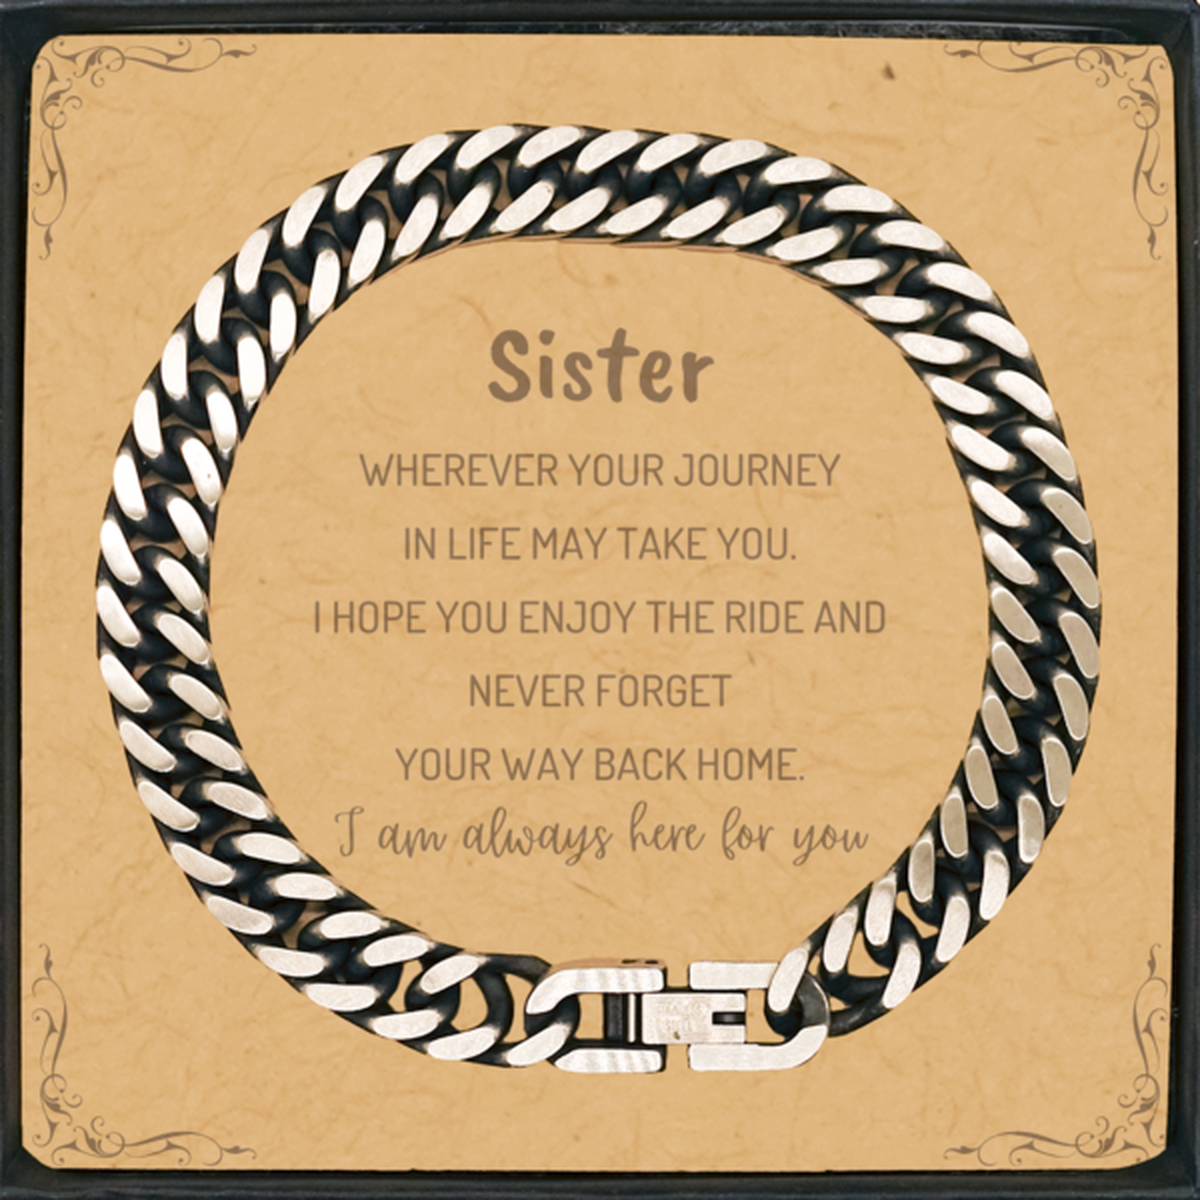 Sister wherever your journey in life may take you, I am always here for you Sister Cuban Link Chain Bracelet, Awesome Christmas Gifts For Sister Message Card, Sister Birthday Gifts for Men Women Family Loved One